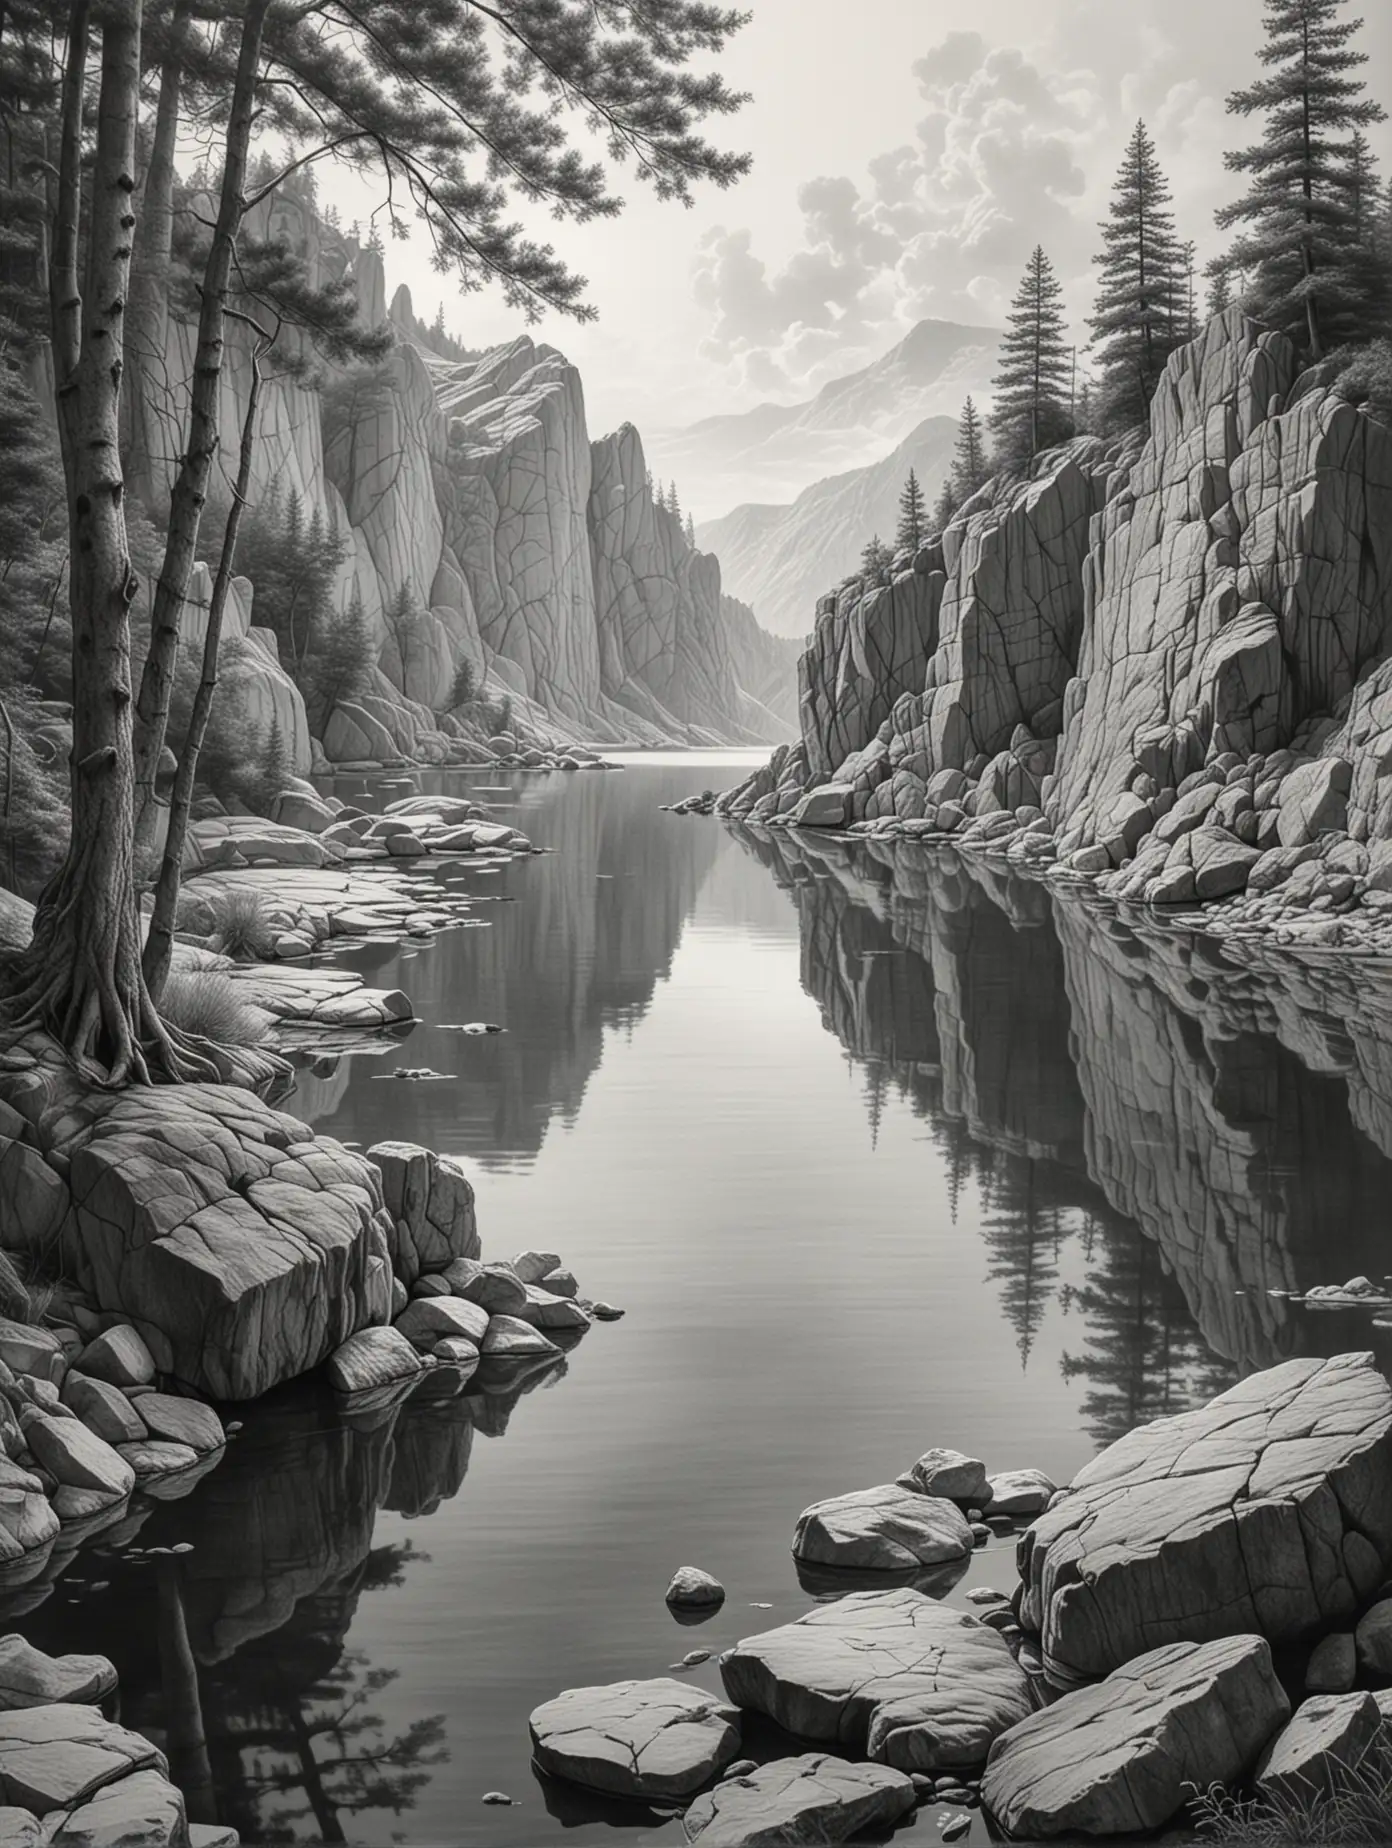 Tranquil-Lake-Landscape-Sketch-in-Realistic-Pencil-Style